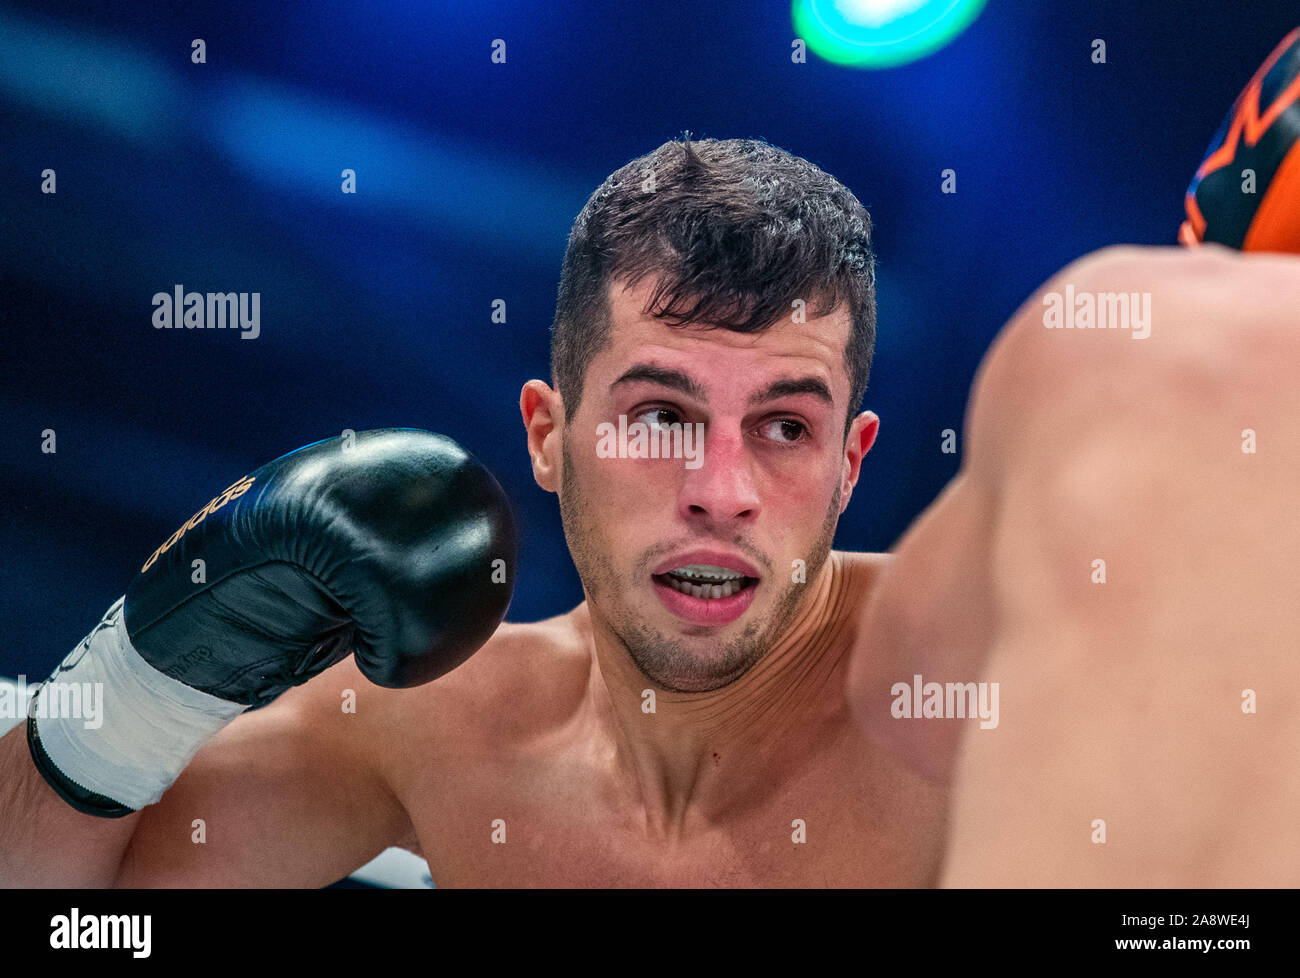 Profiboxer High Resolution Stock Photography and Images - Alamy